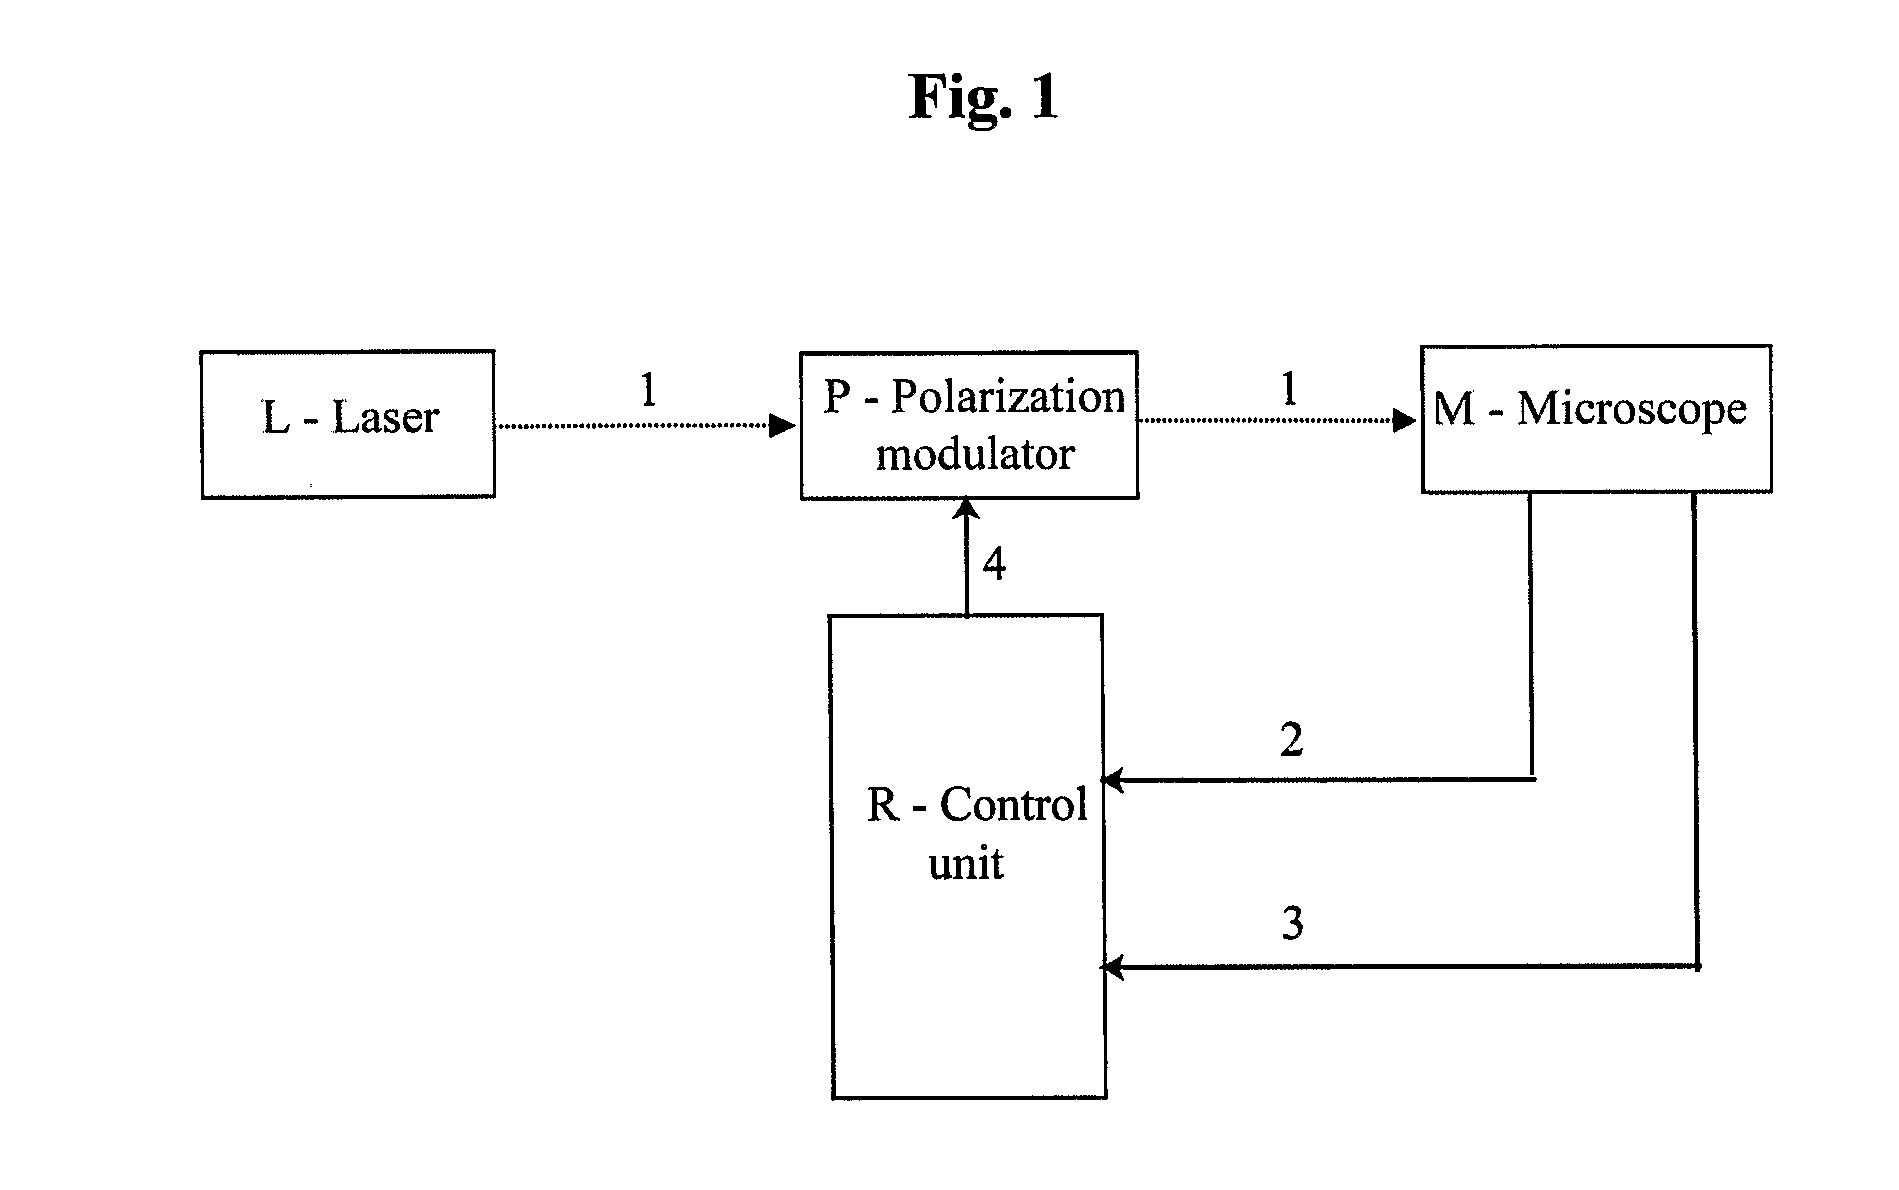 Method for obtaining structural and functional information on proteins, based on polarization fluorescence microscopy, and a device implementing said method